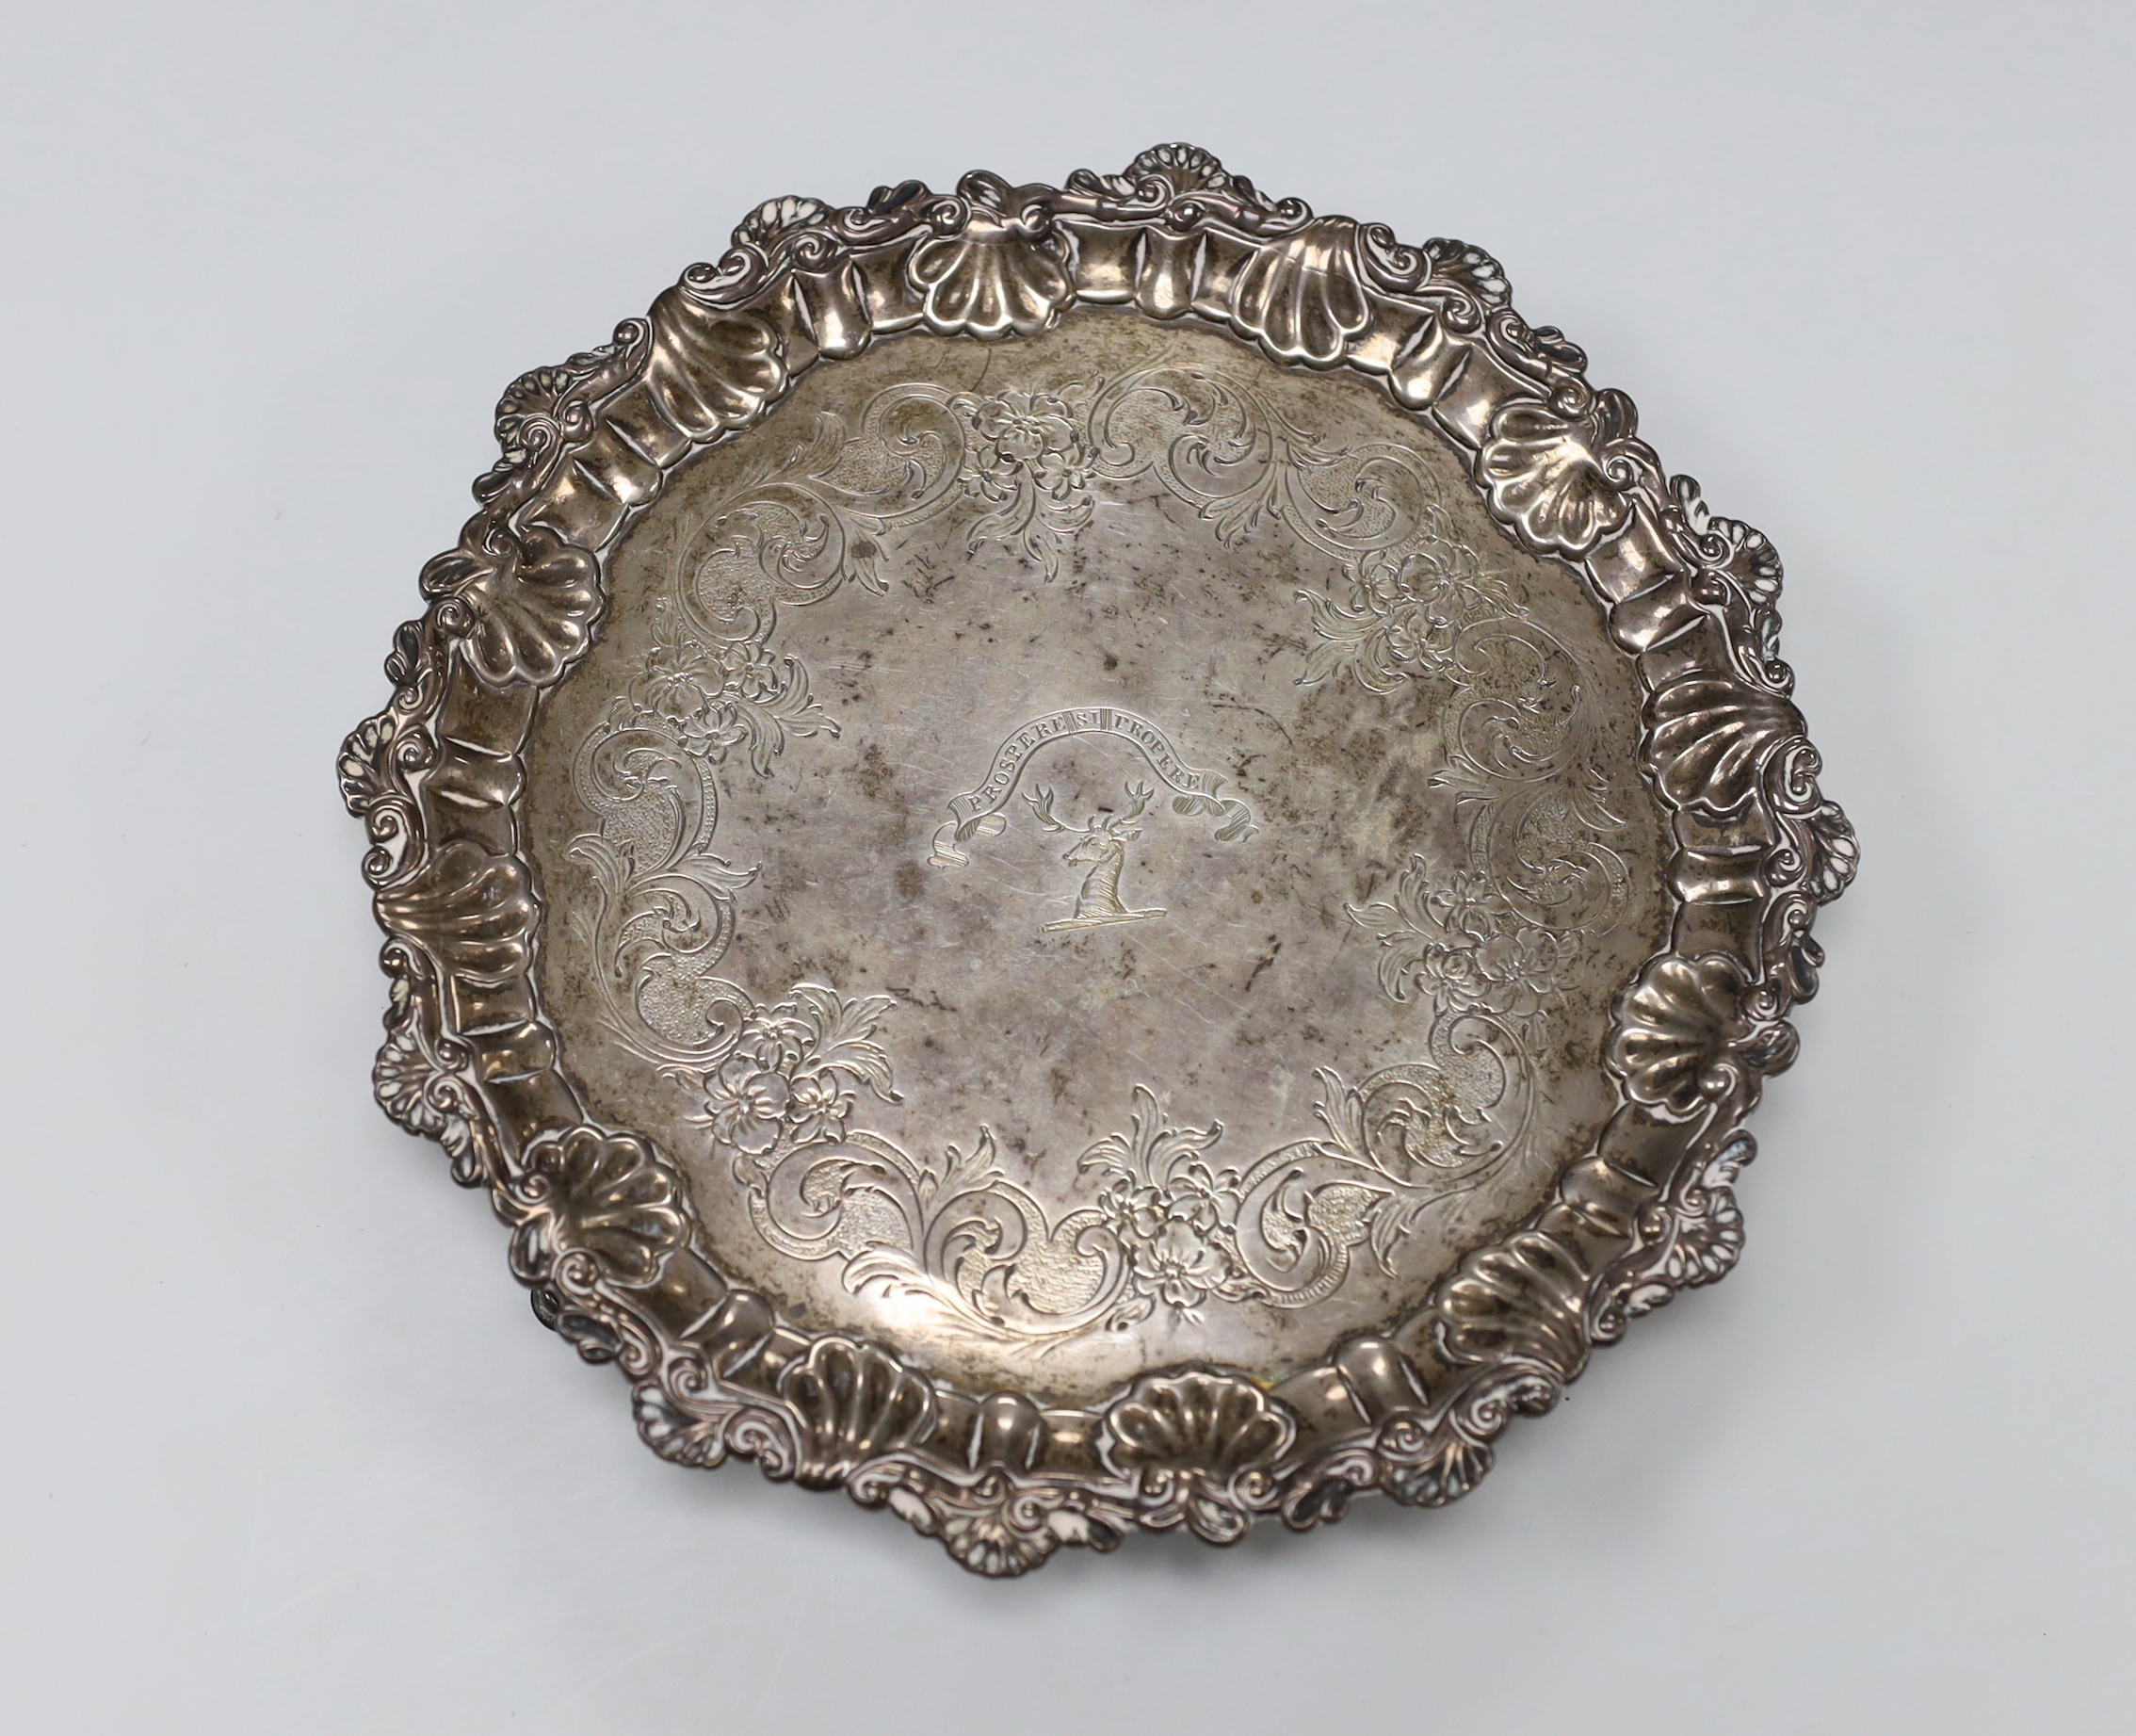 A late George II silver waiter, with engraved crest and later chased decoration, Ebenezer Coker, London, 1758, 19.2cm, 8.4 oz.                                                                                              